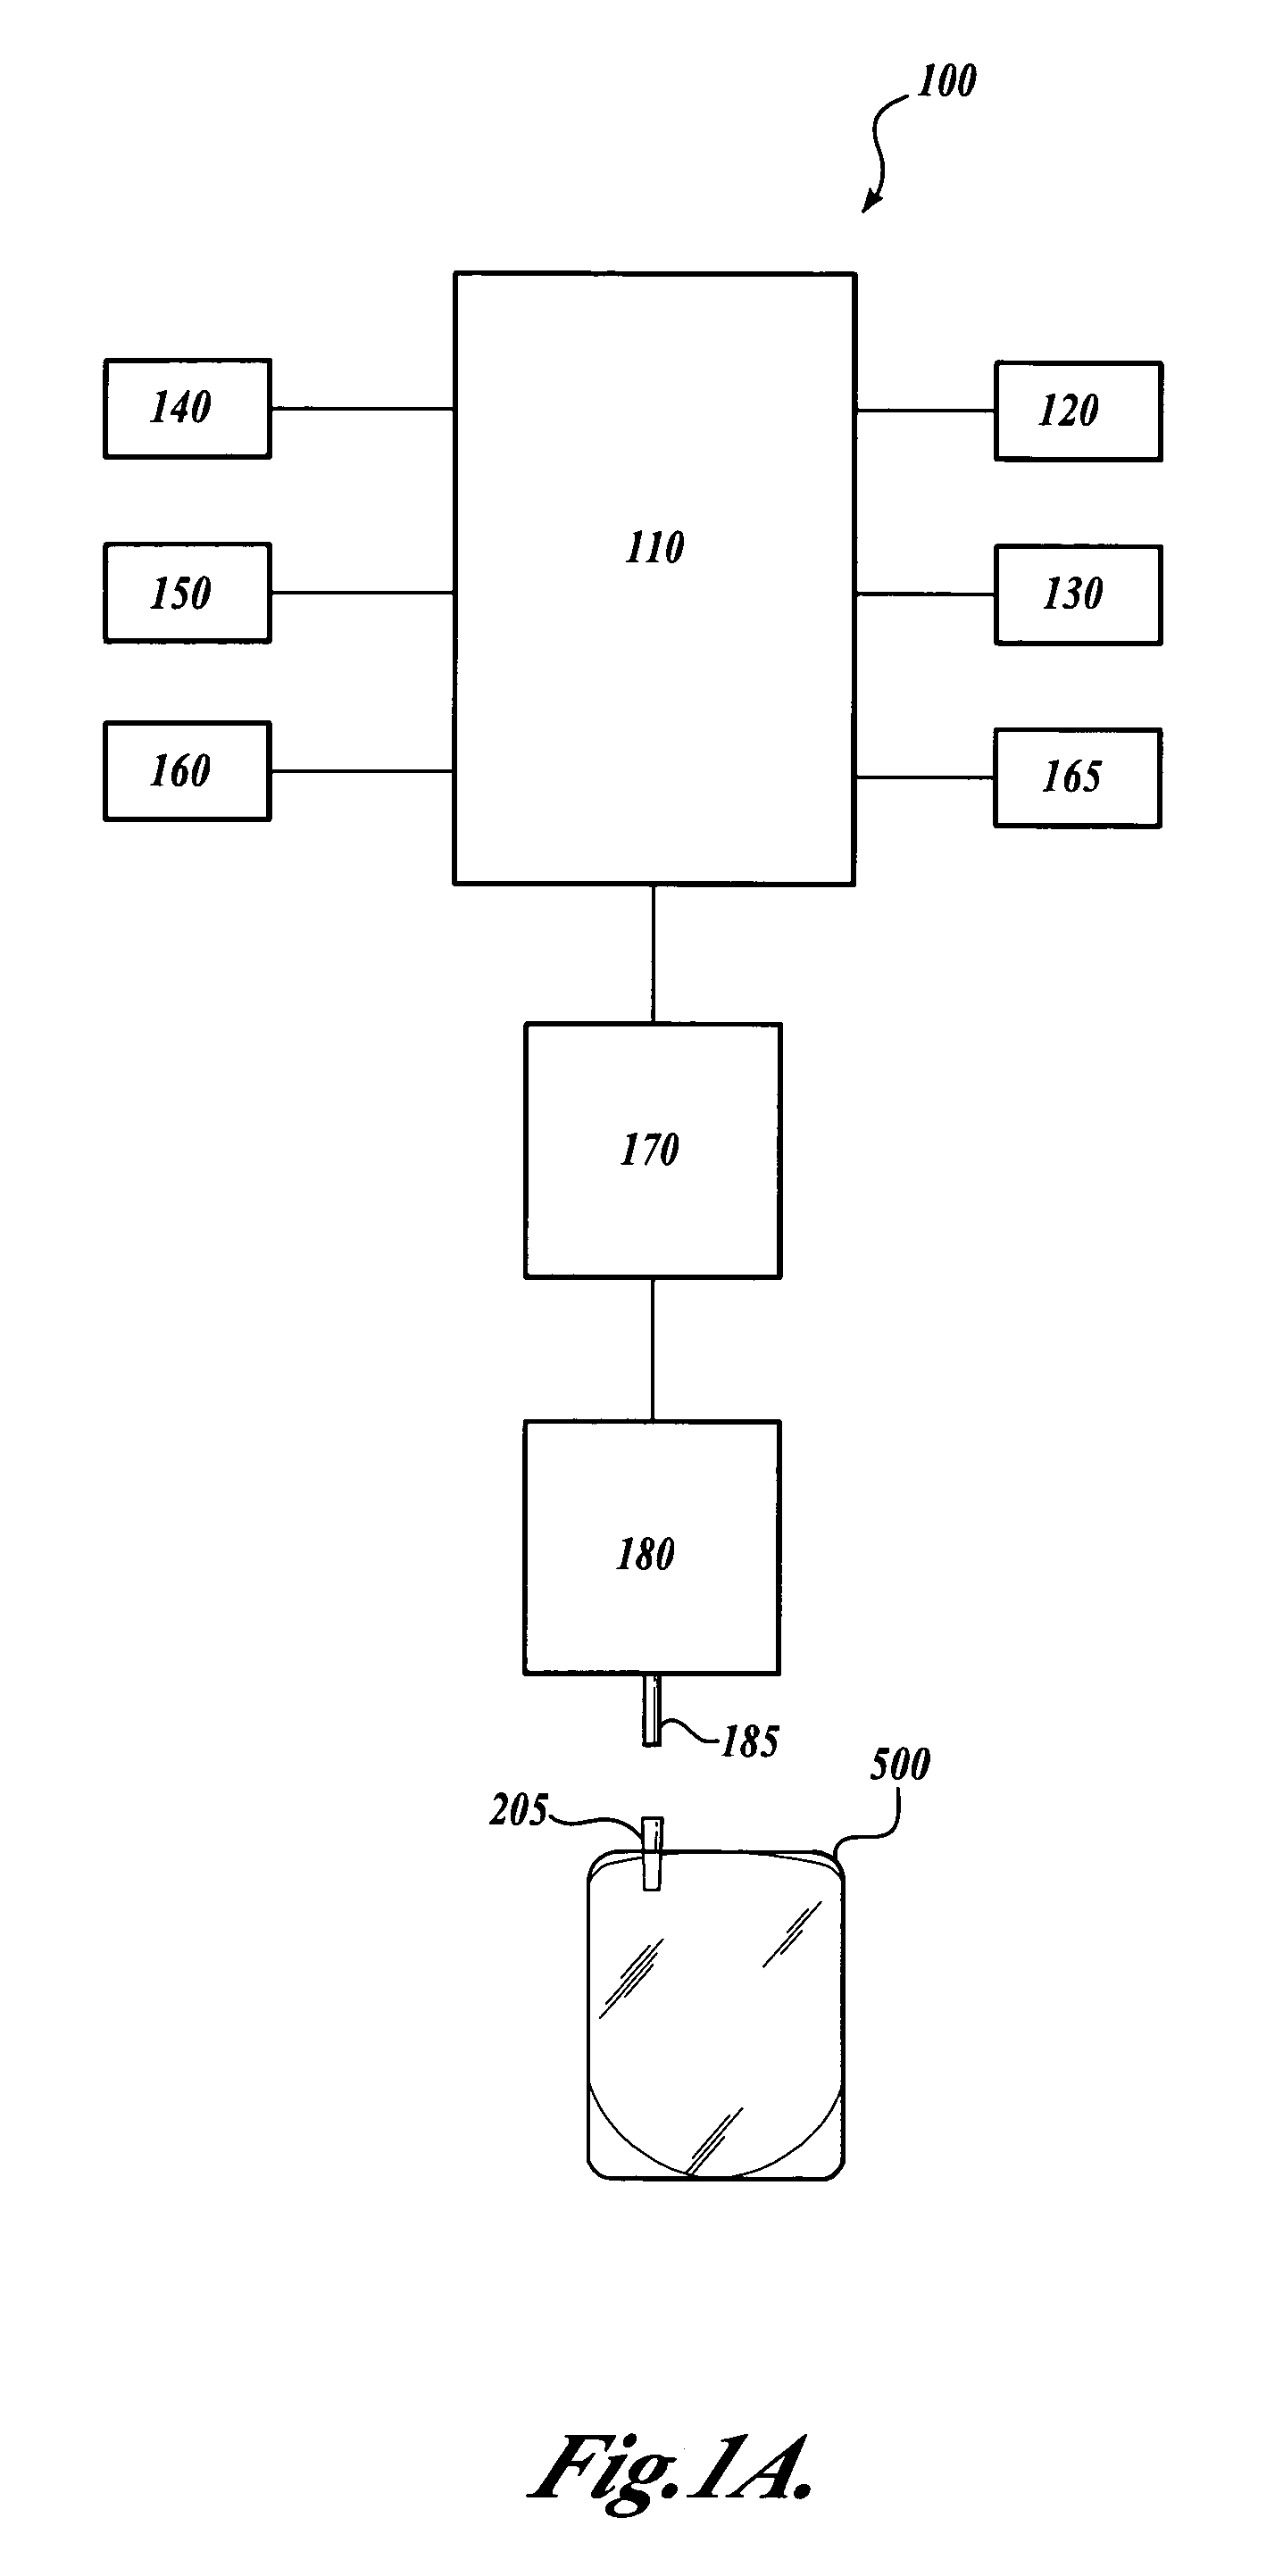 Fluorescent pH detector system and related methods